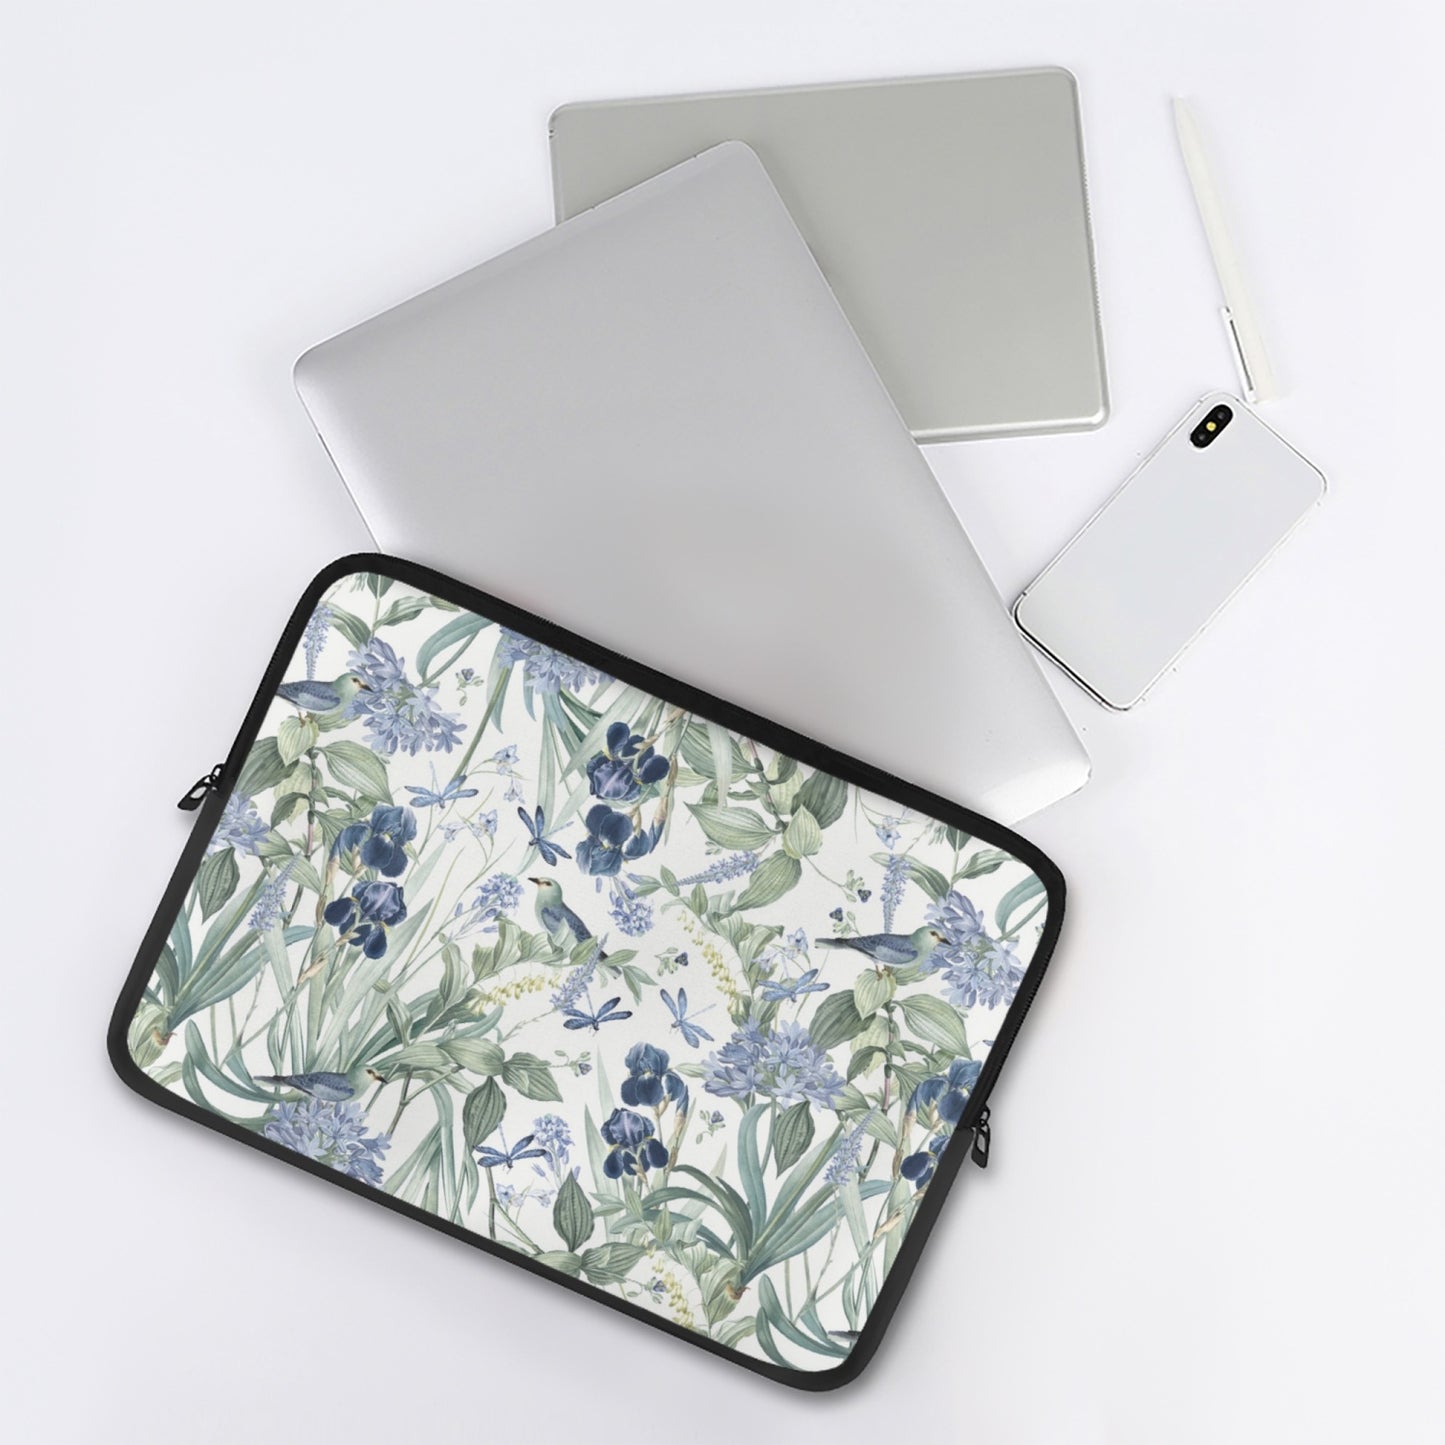 «Mint and Teal» Laptop Sleeve